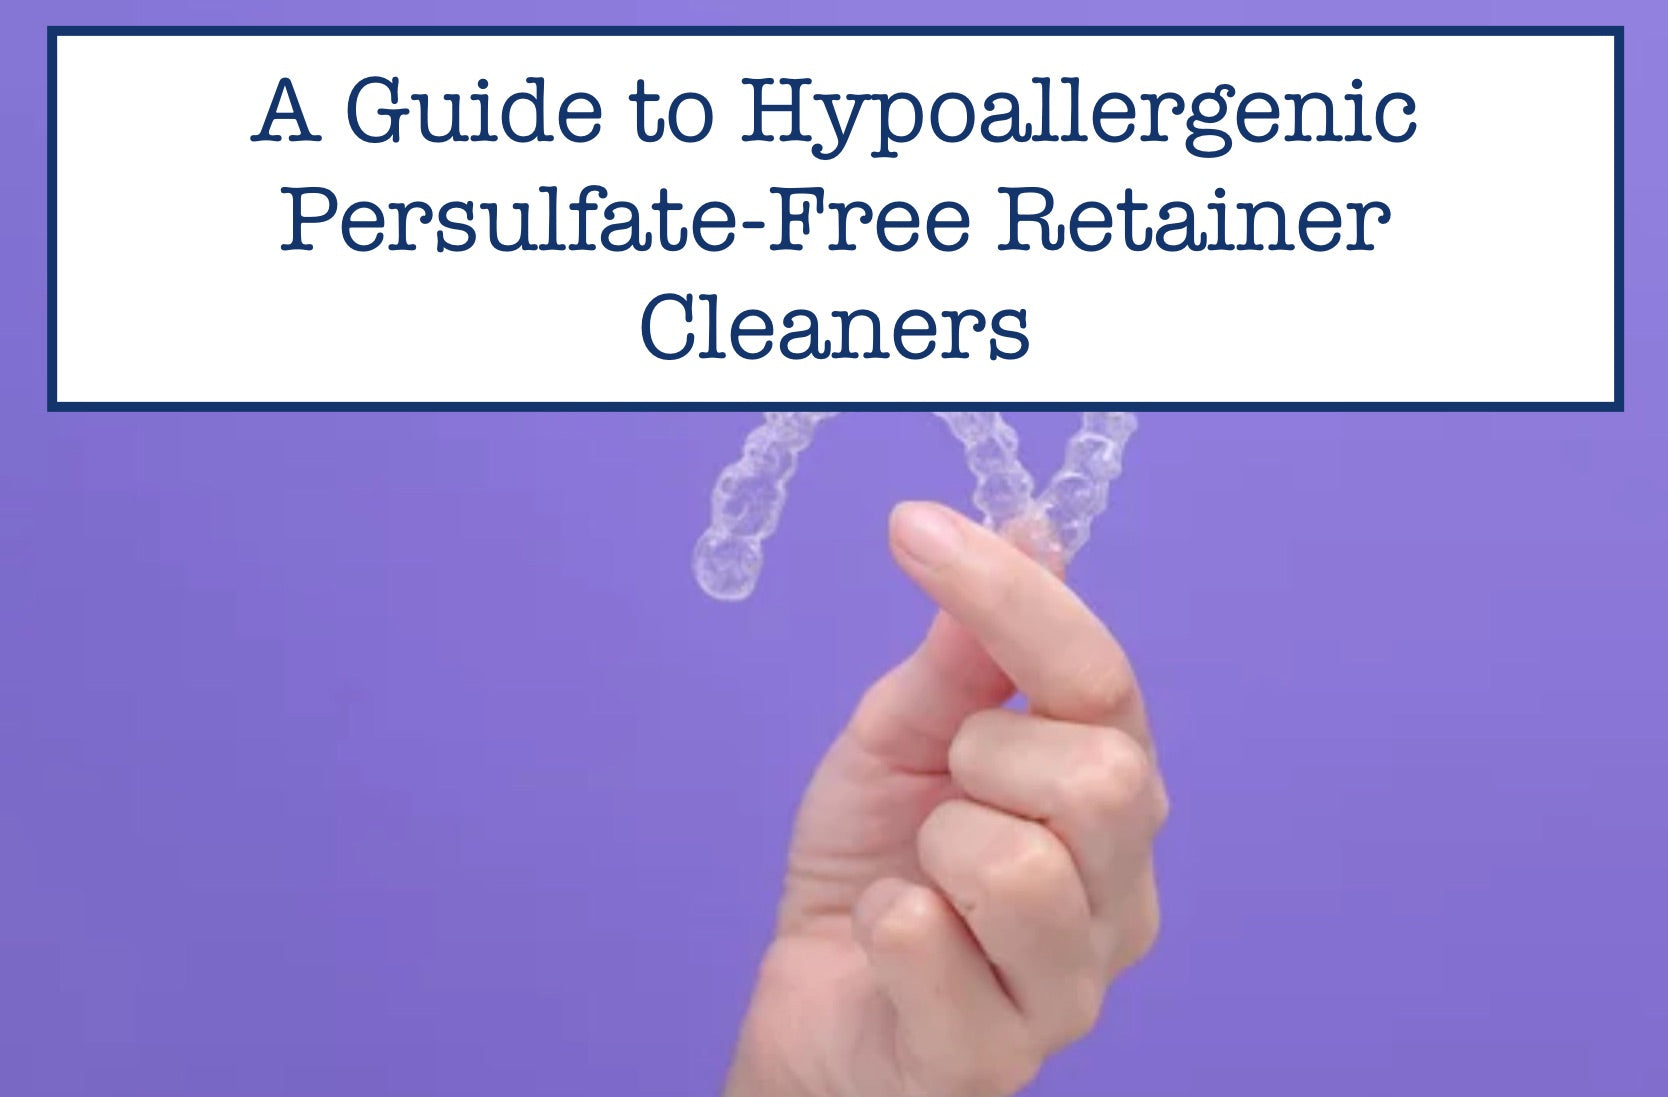 A Guide to Hypoallergenic Persulfate-Free Retainer Cleaners